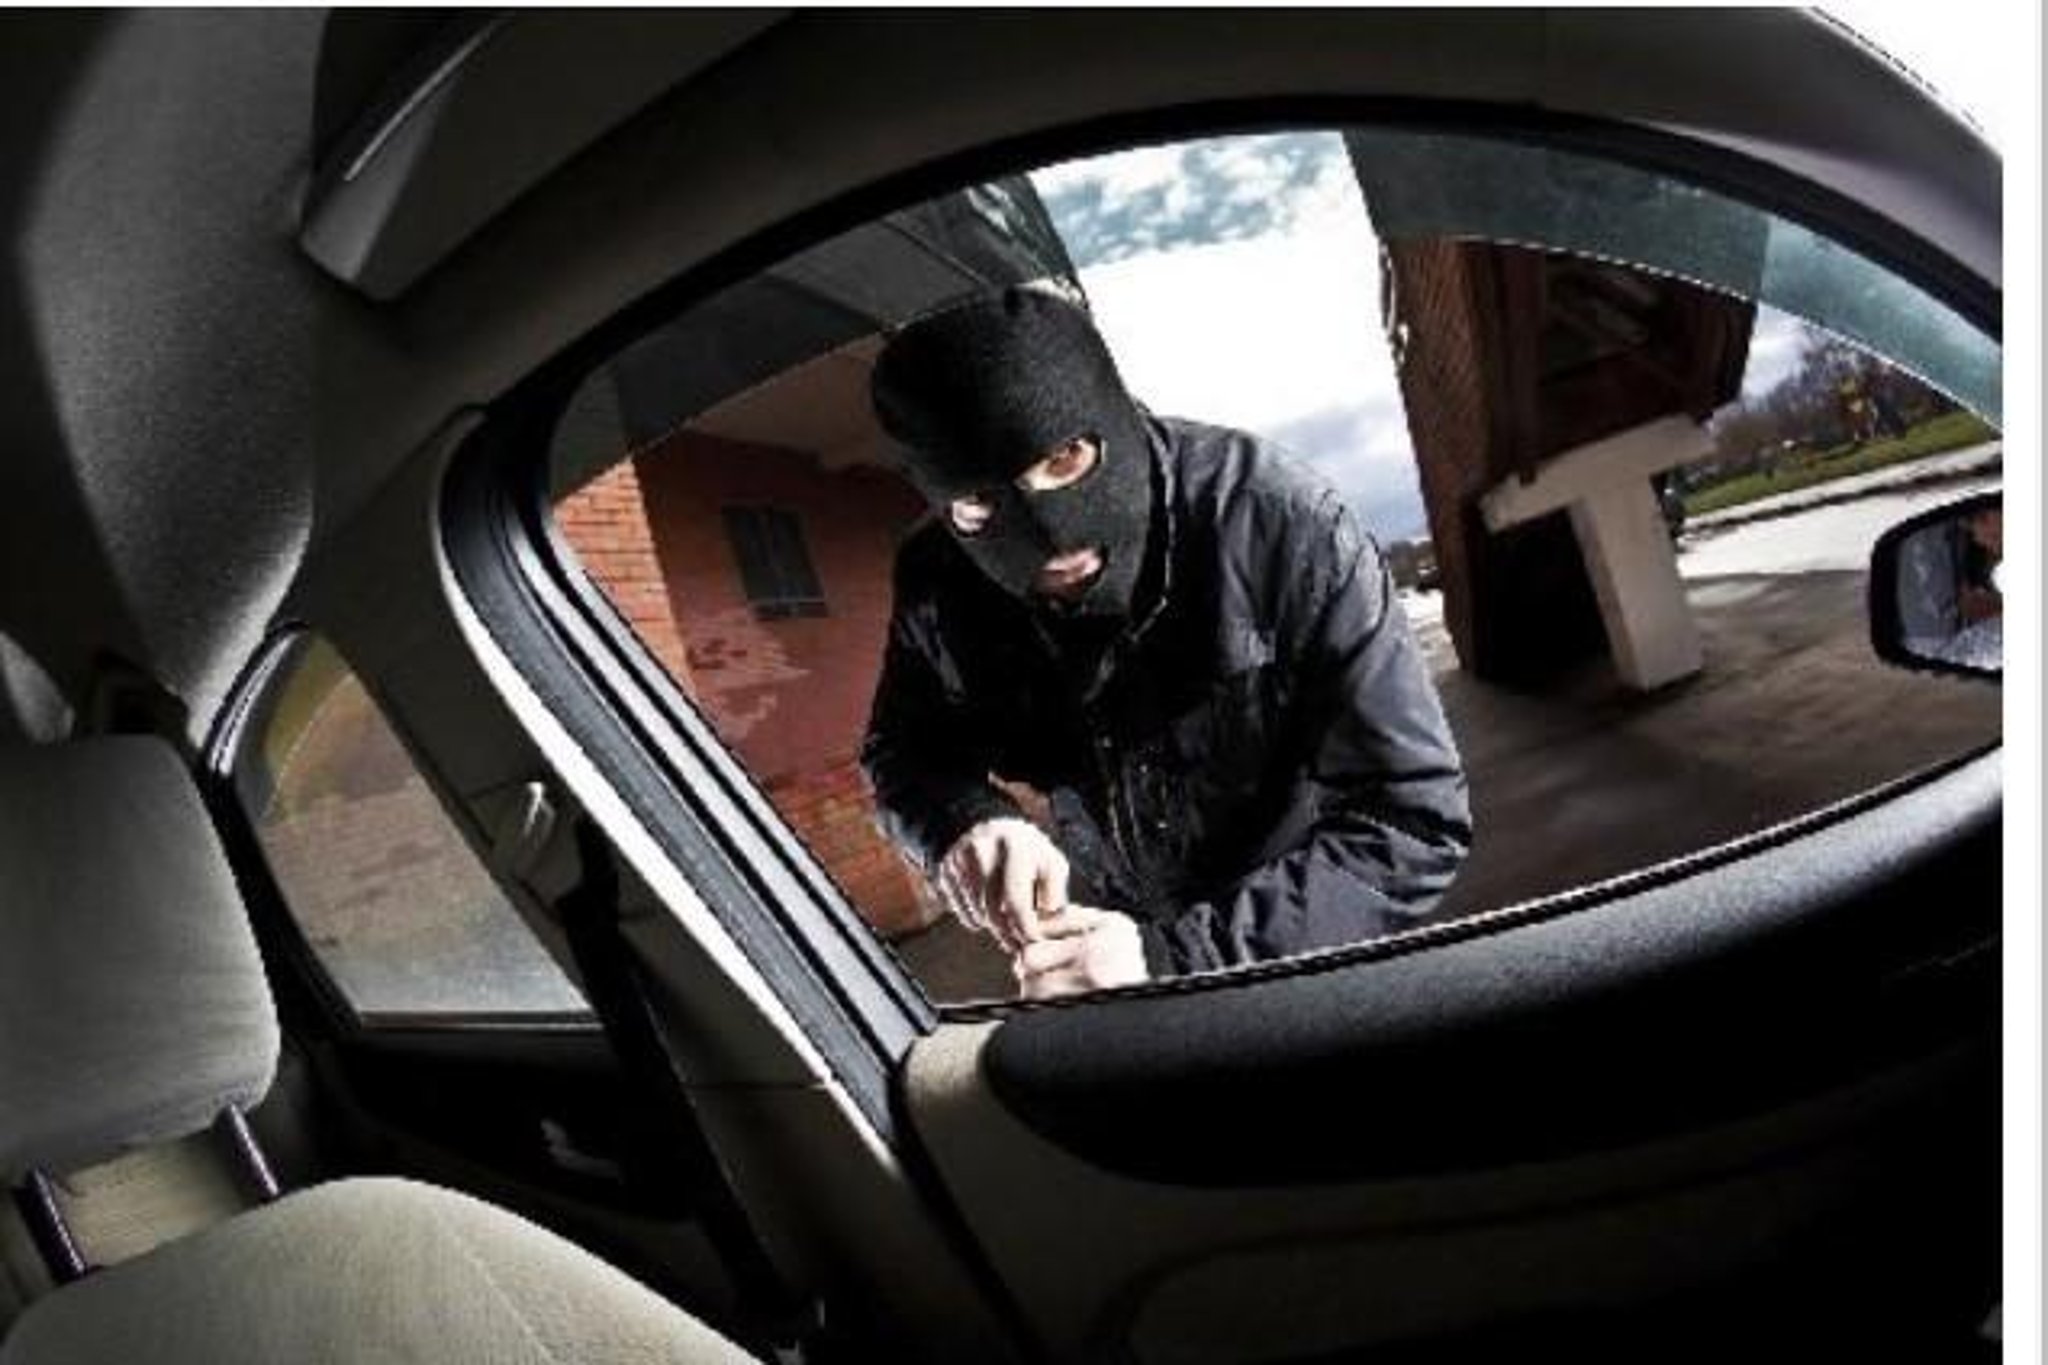 Mercedes stolen from NI owner  without using vehicle's keys - PSNI urge 'vehicle owners to be vigilant, especially those with keyless entry cars'